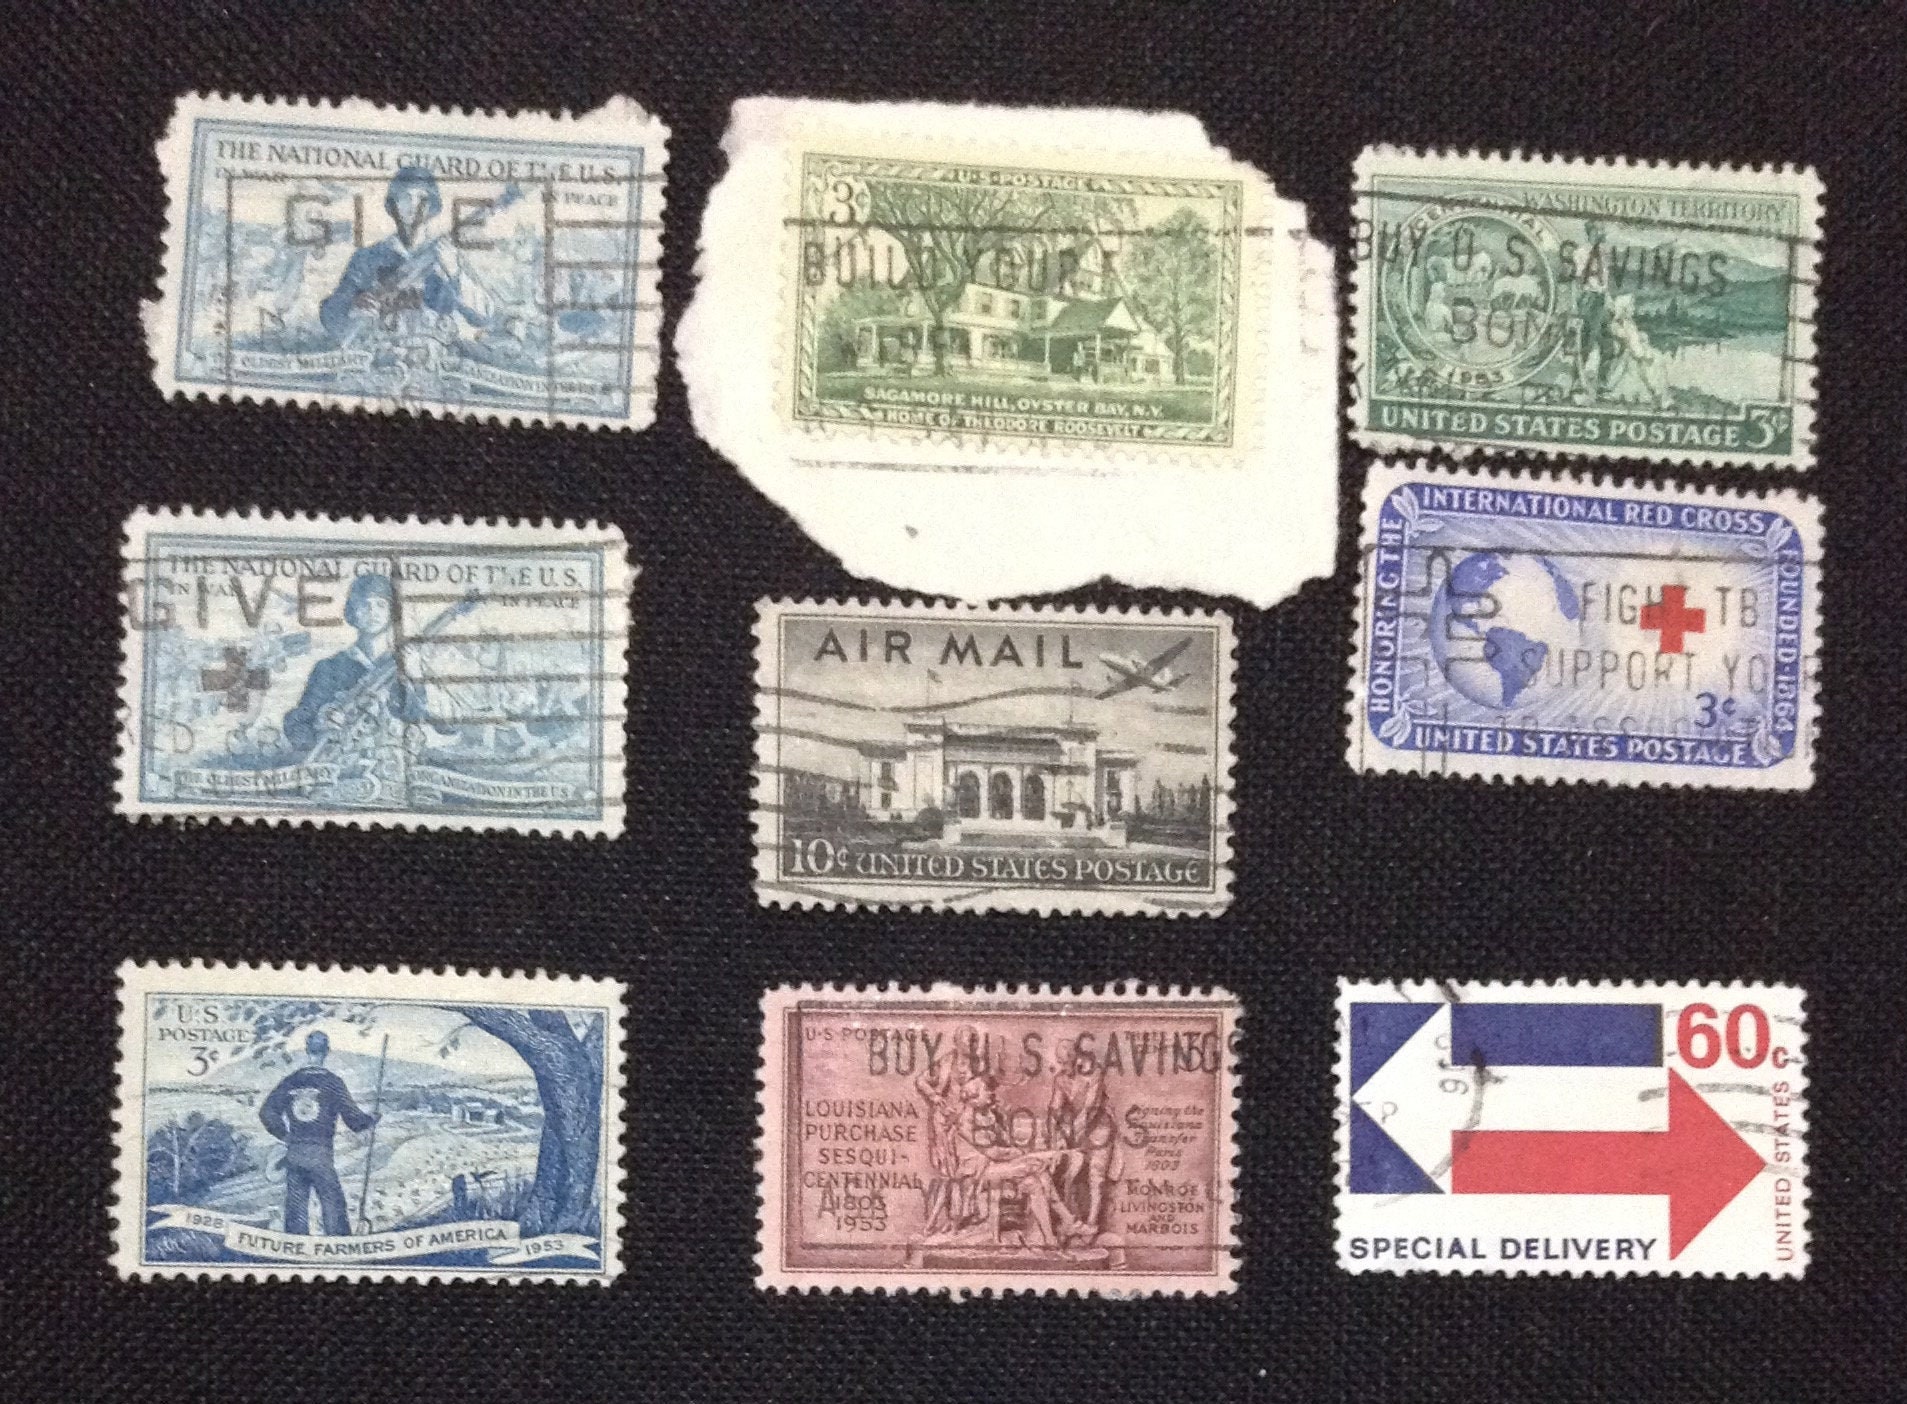 Antique and Rare, Postage Stamps, - Etsy